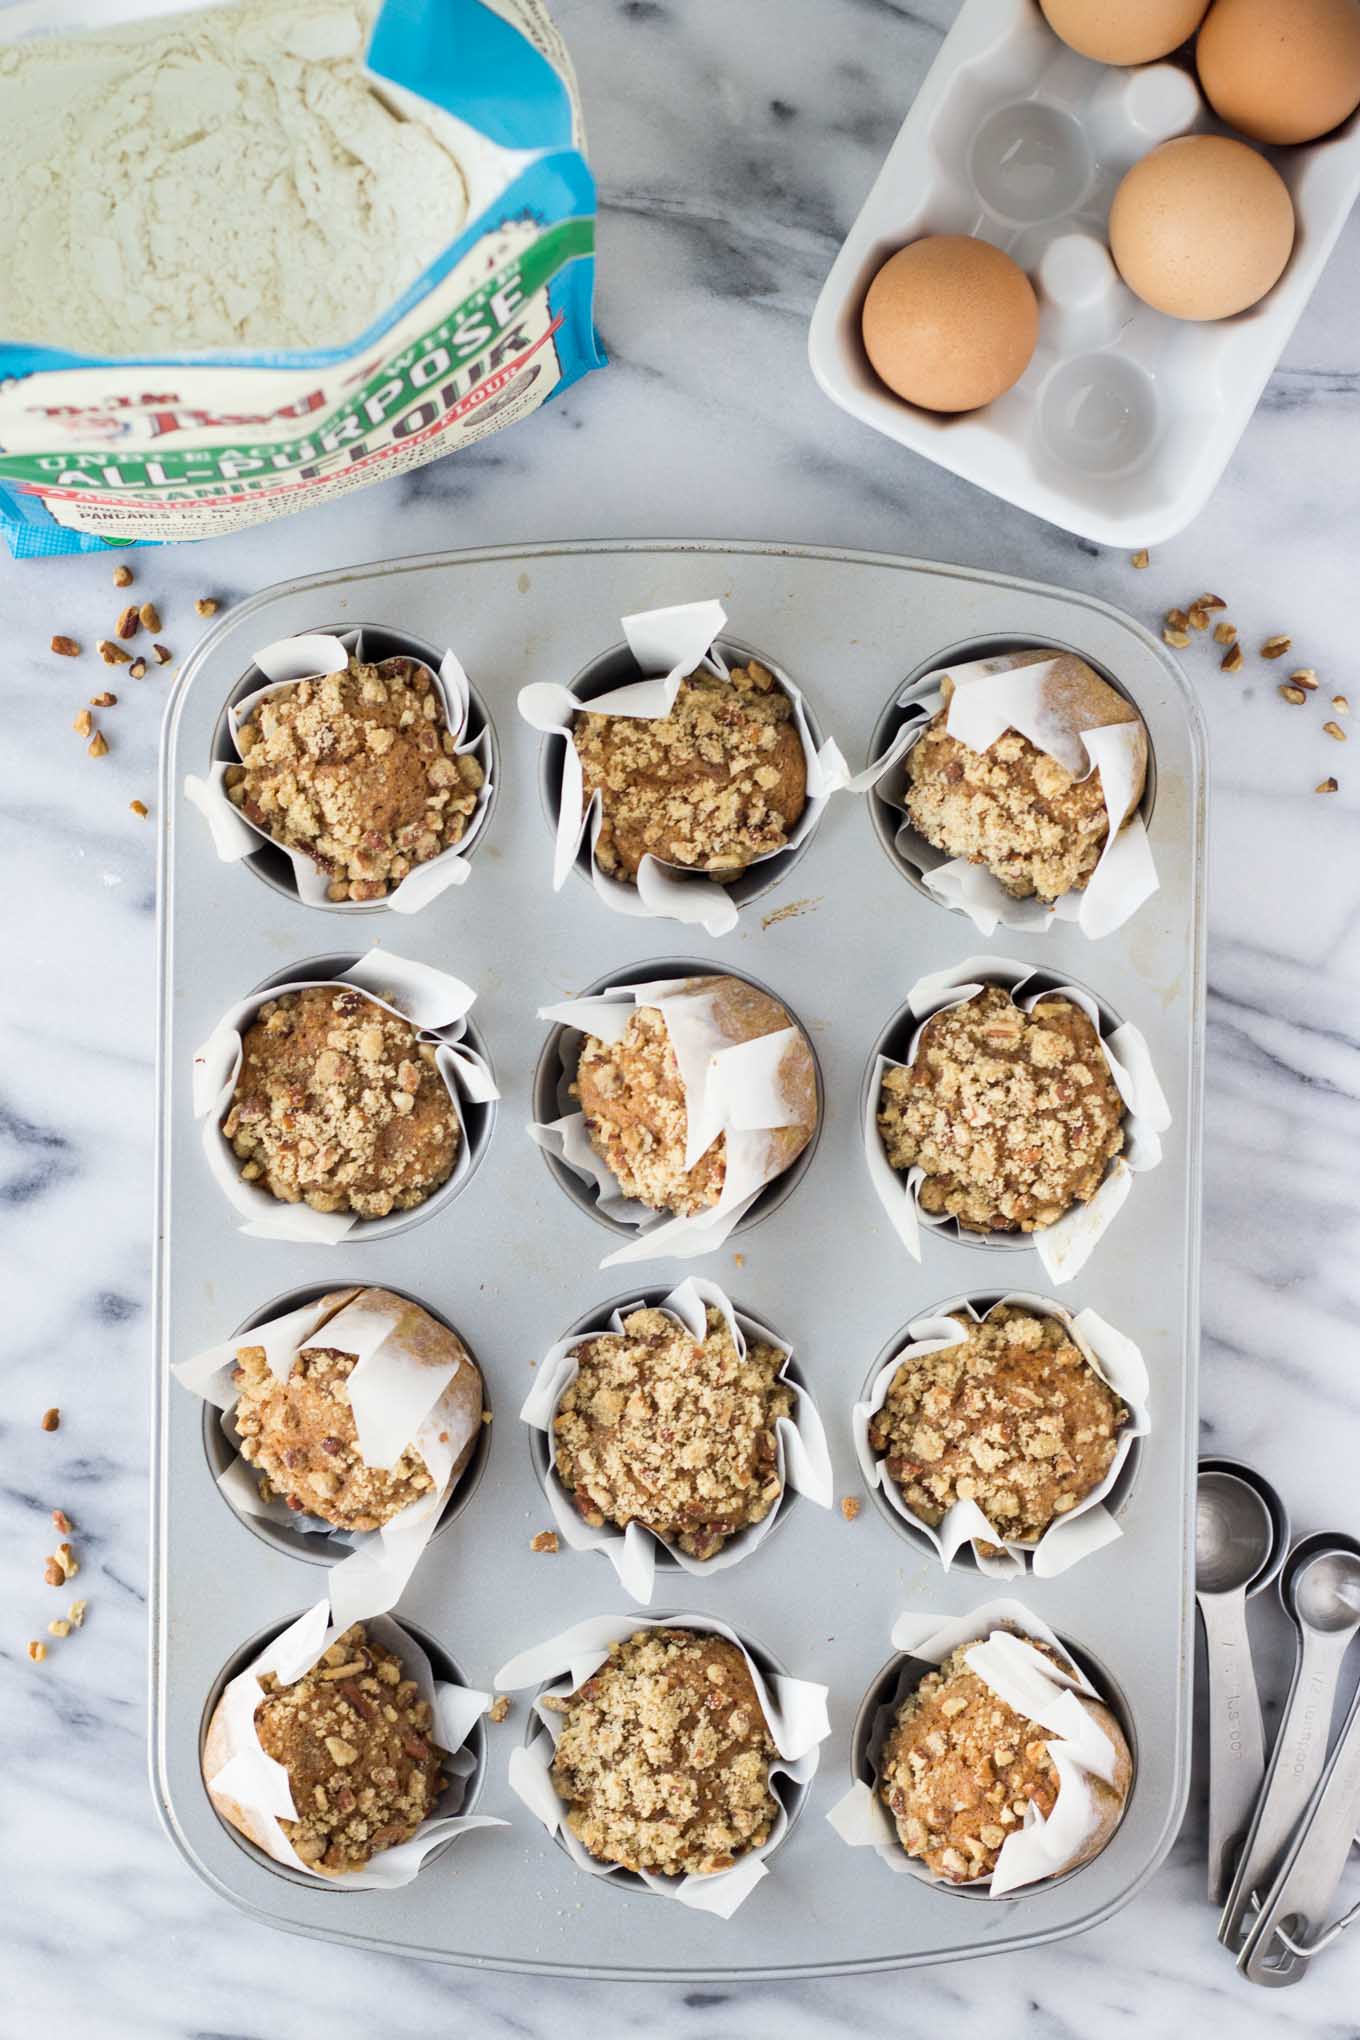 Baked muffins with crumble in muffin tin.